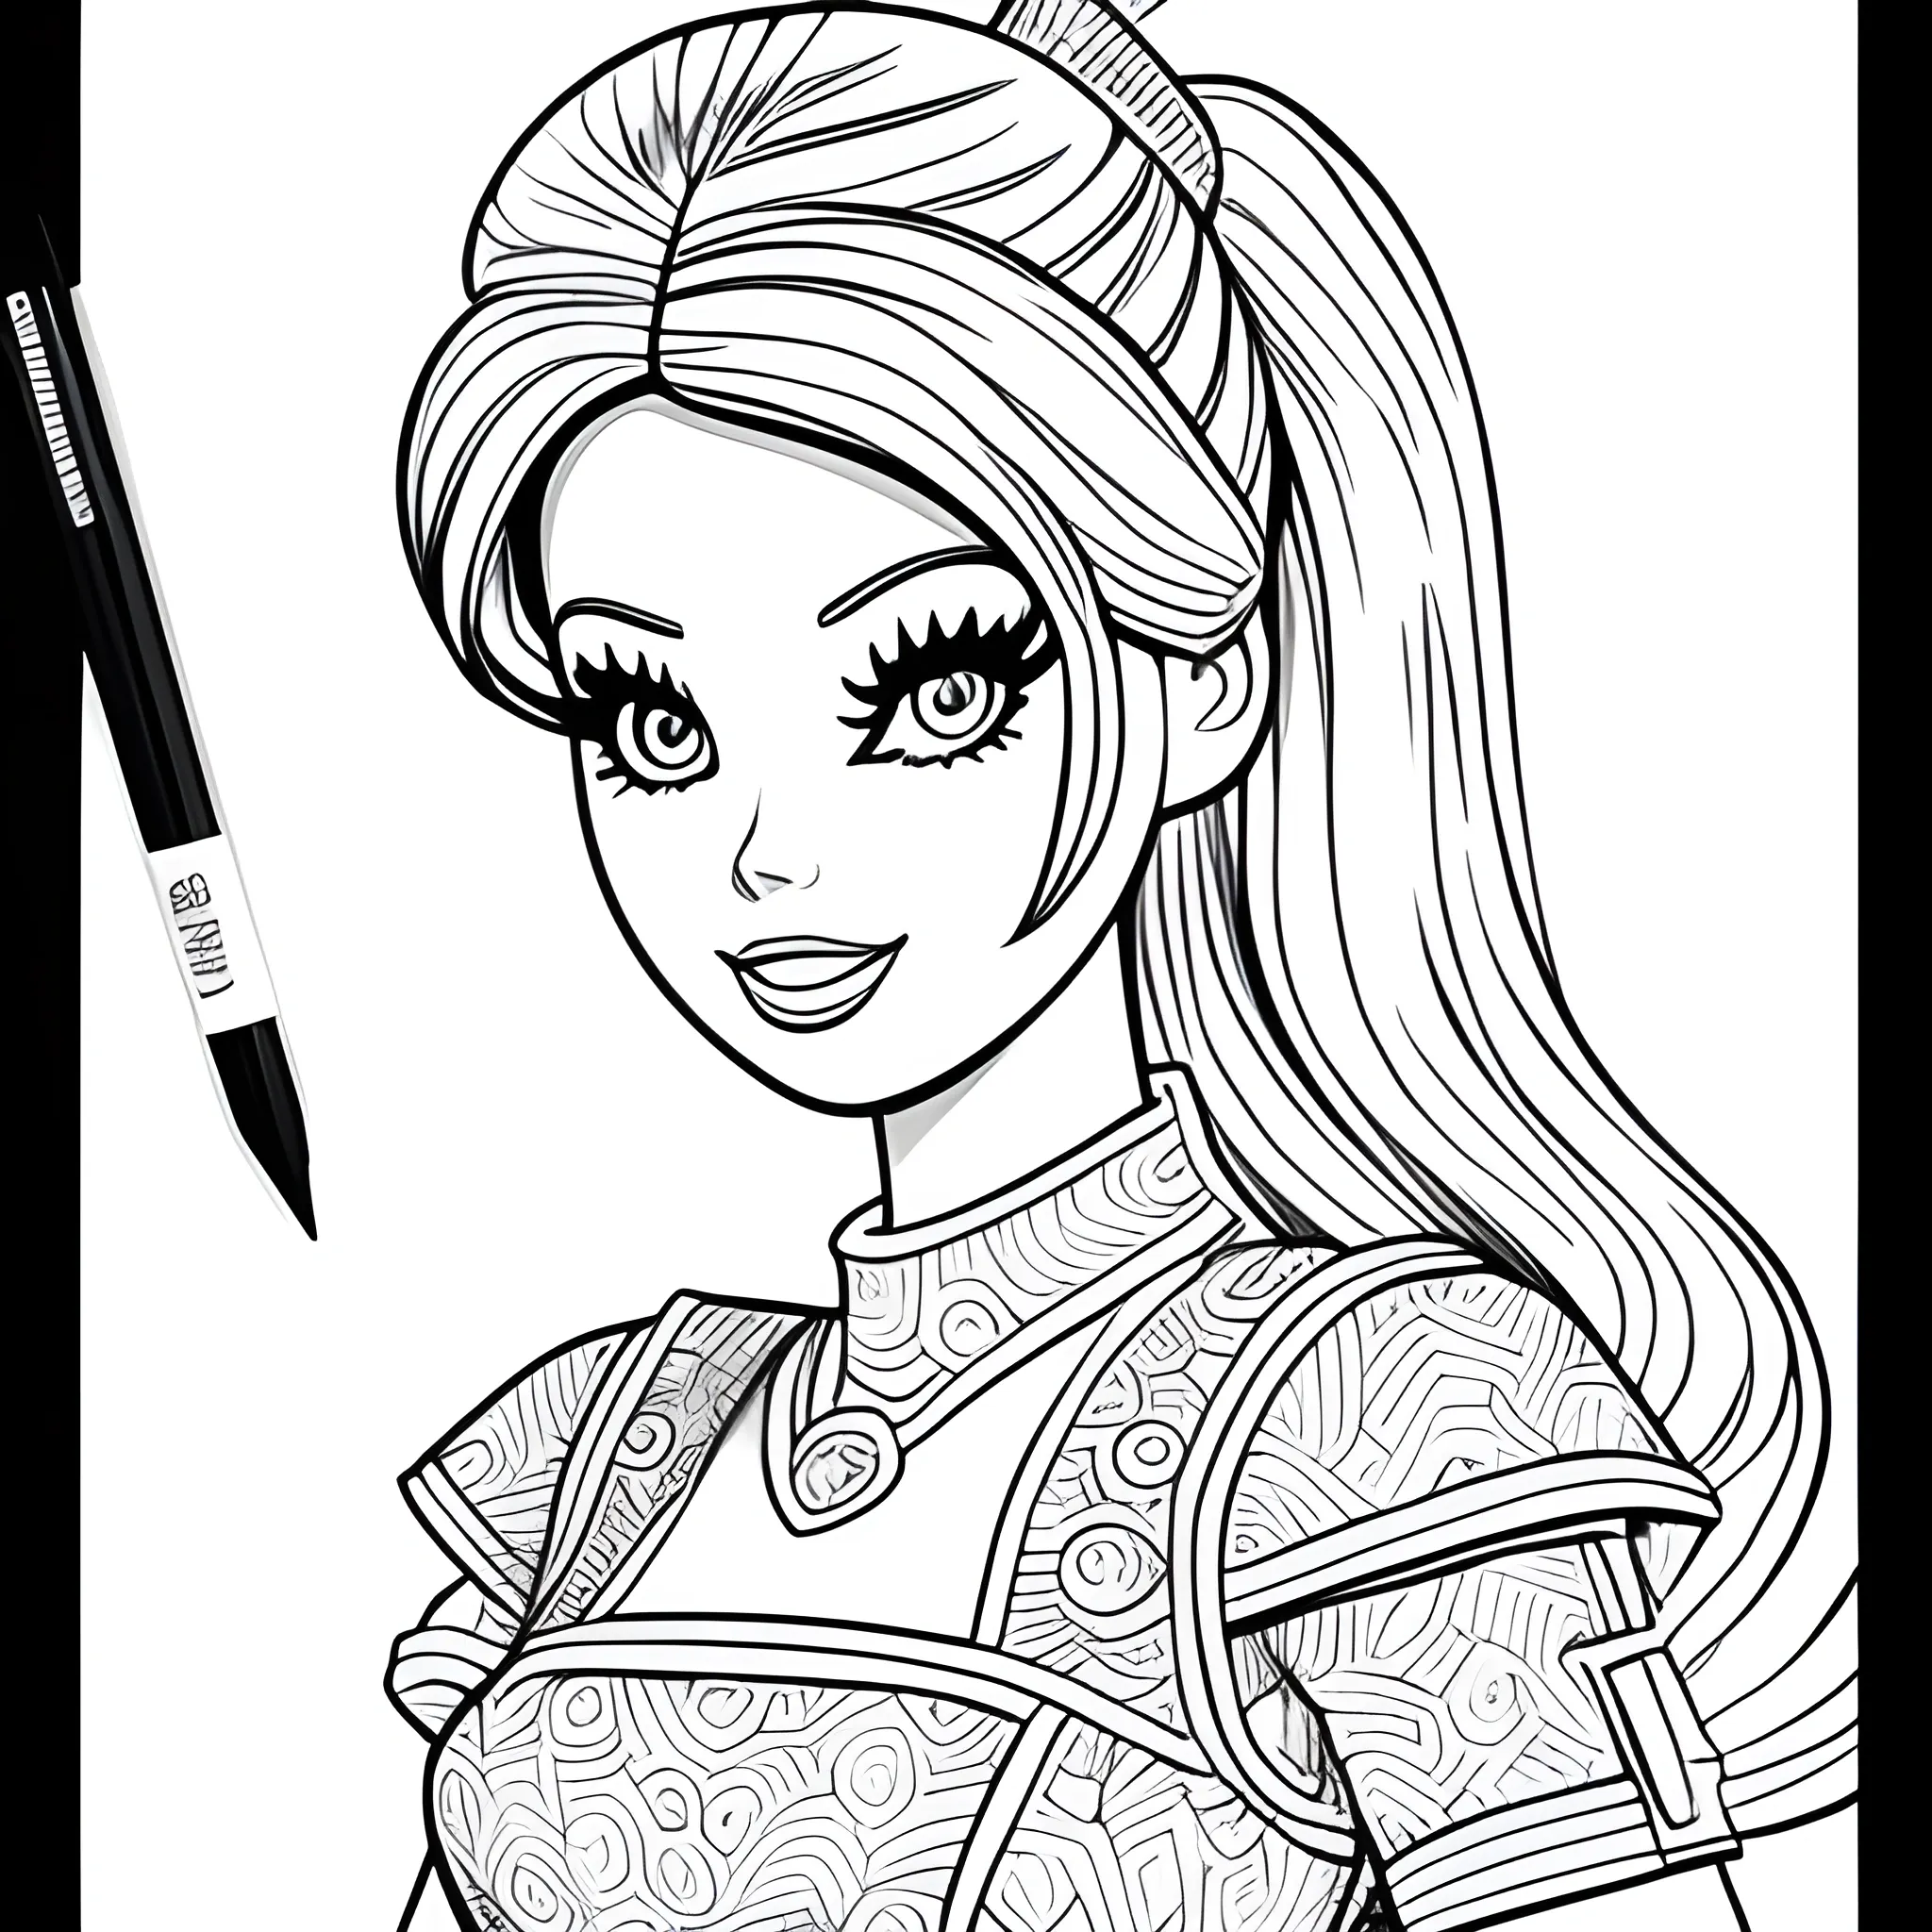 Barbie in coloring book style, black and white, , Pencil Sketch - Arthub.ai